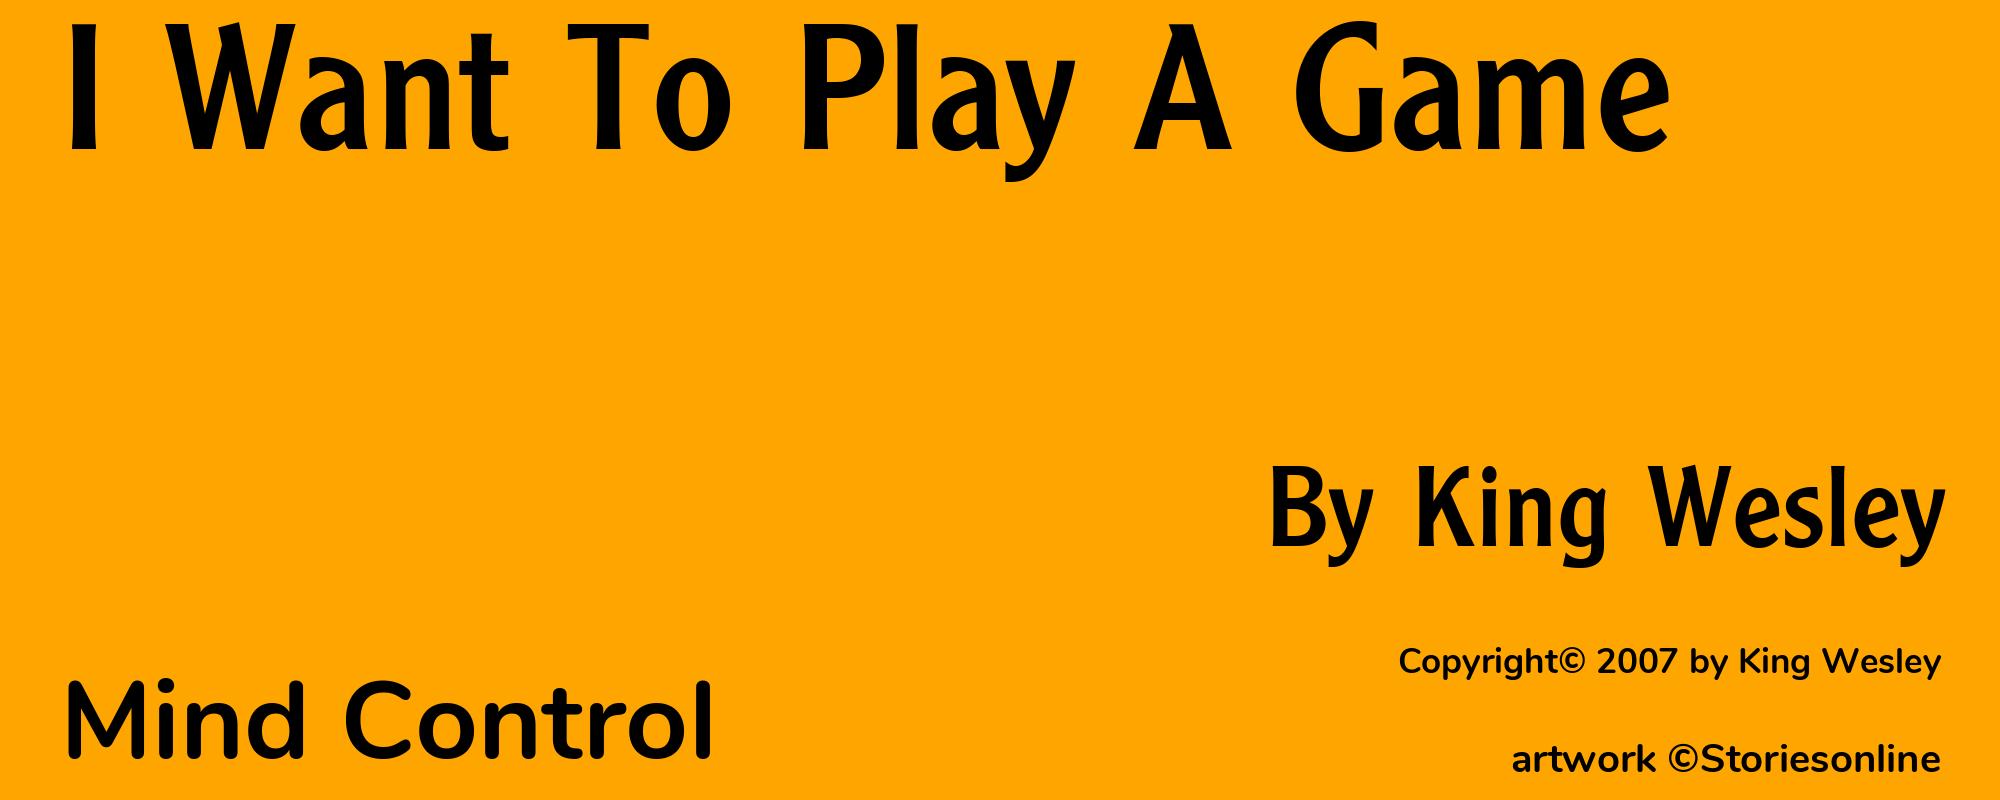 I Want To Play A Game - Cover